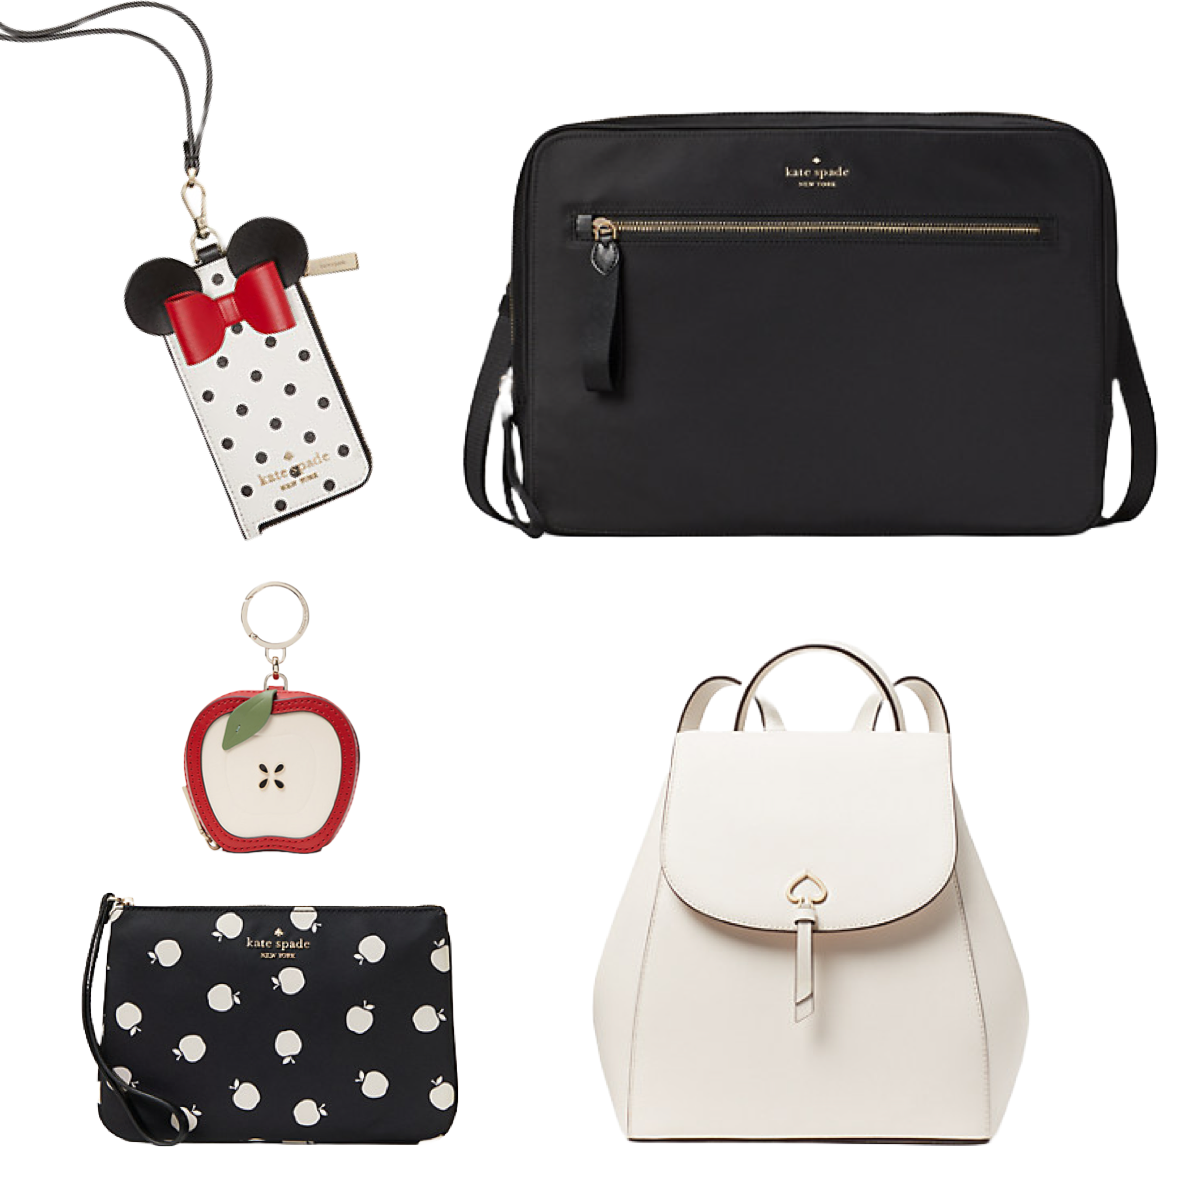 Up to 80% Off Kate Spade Surprise Sale